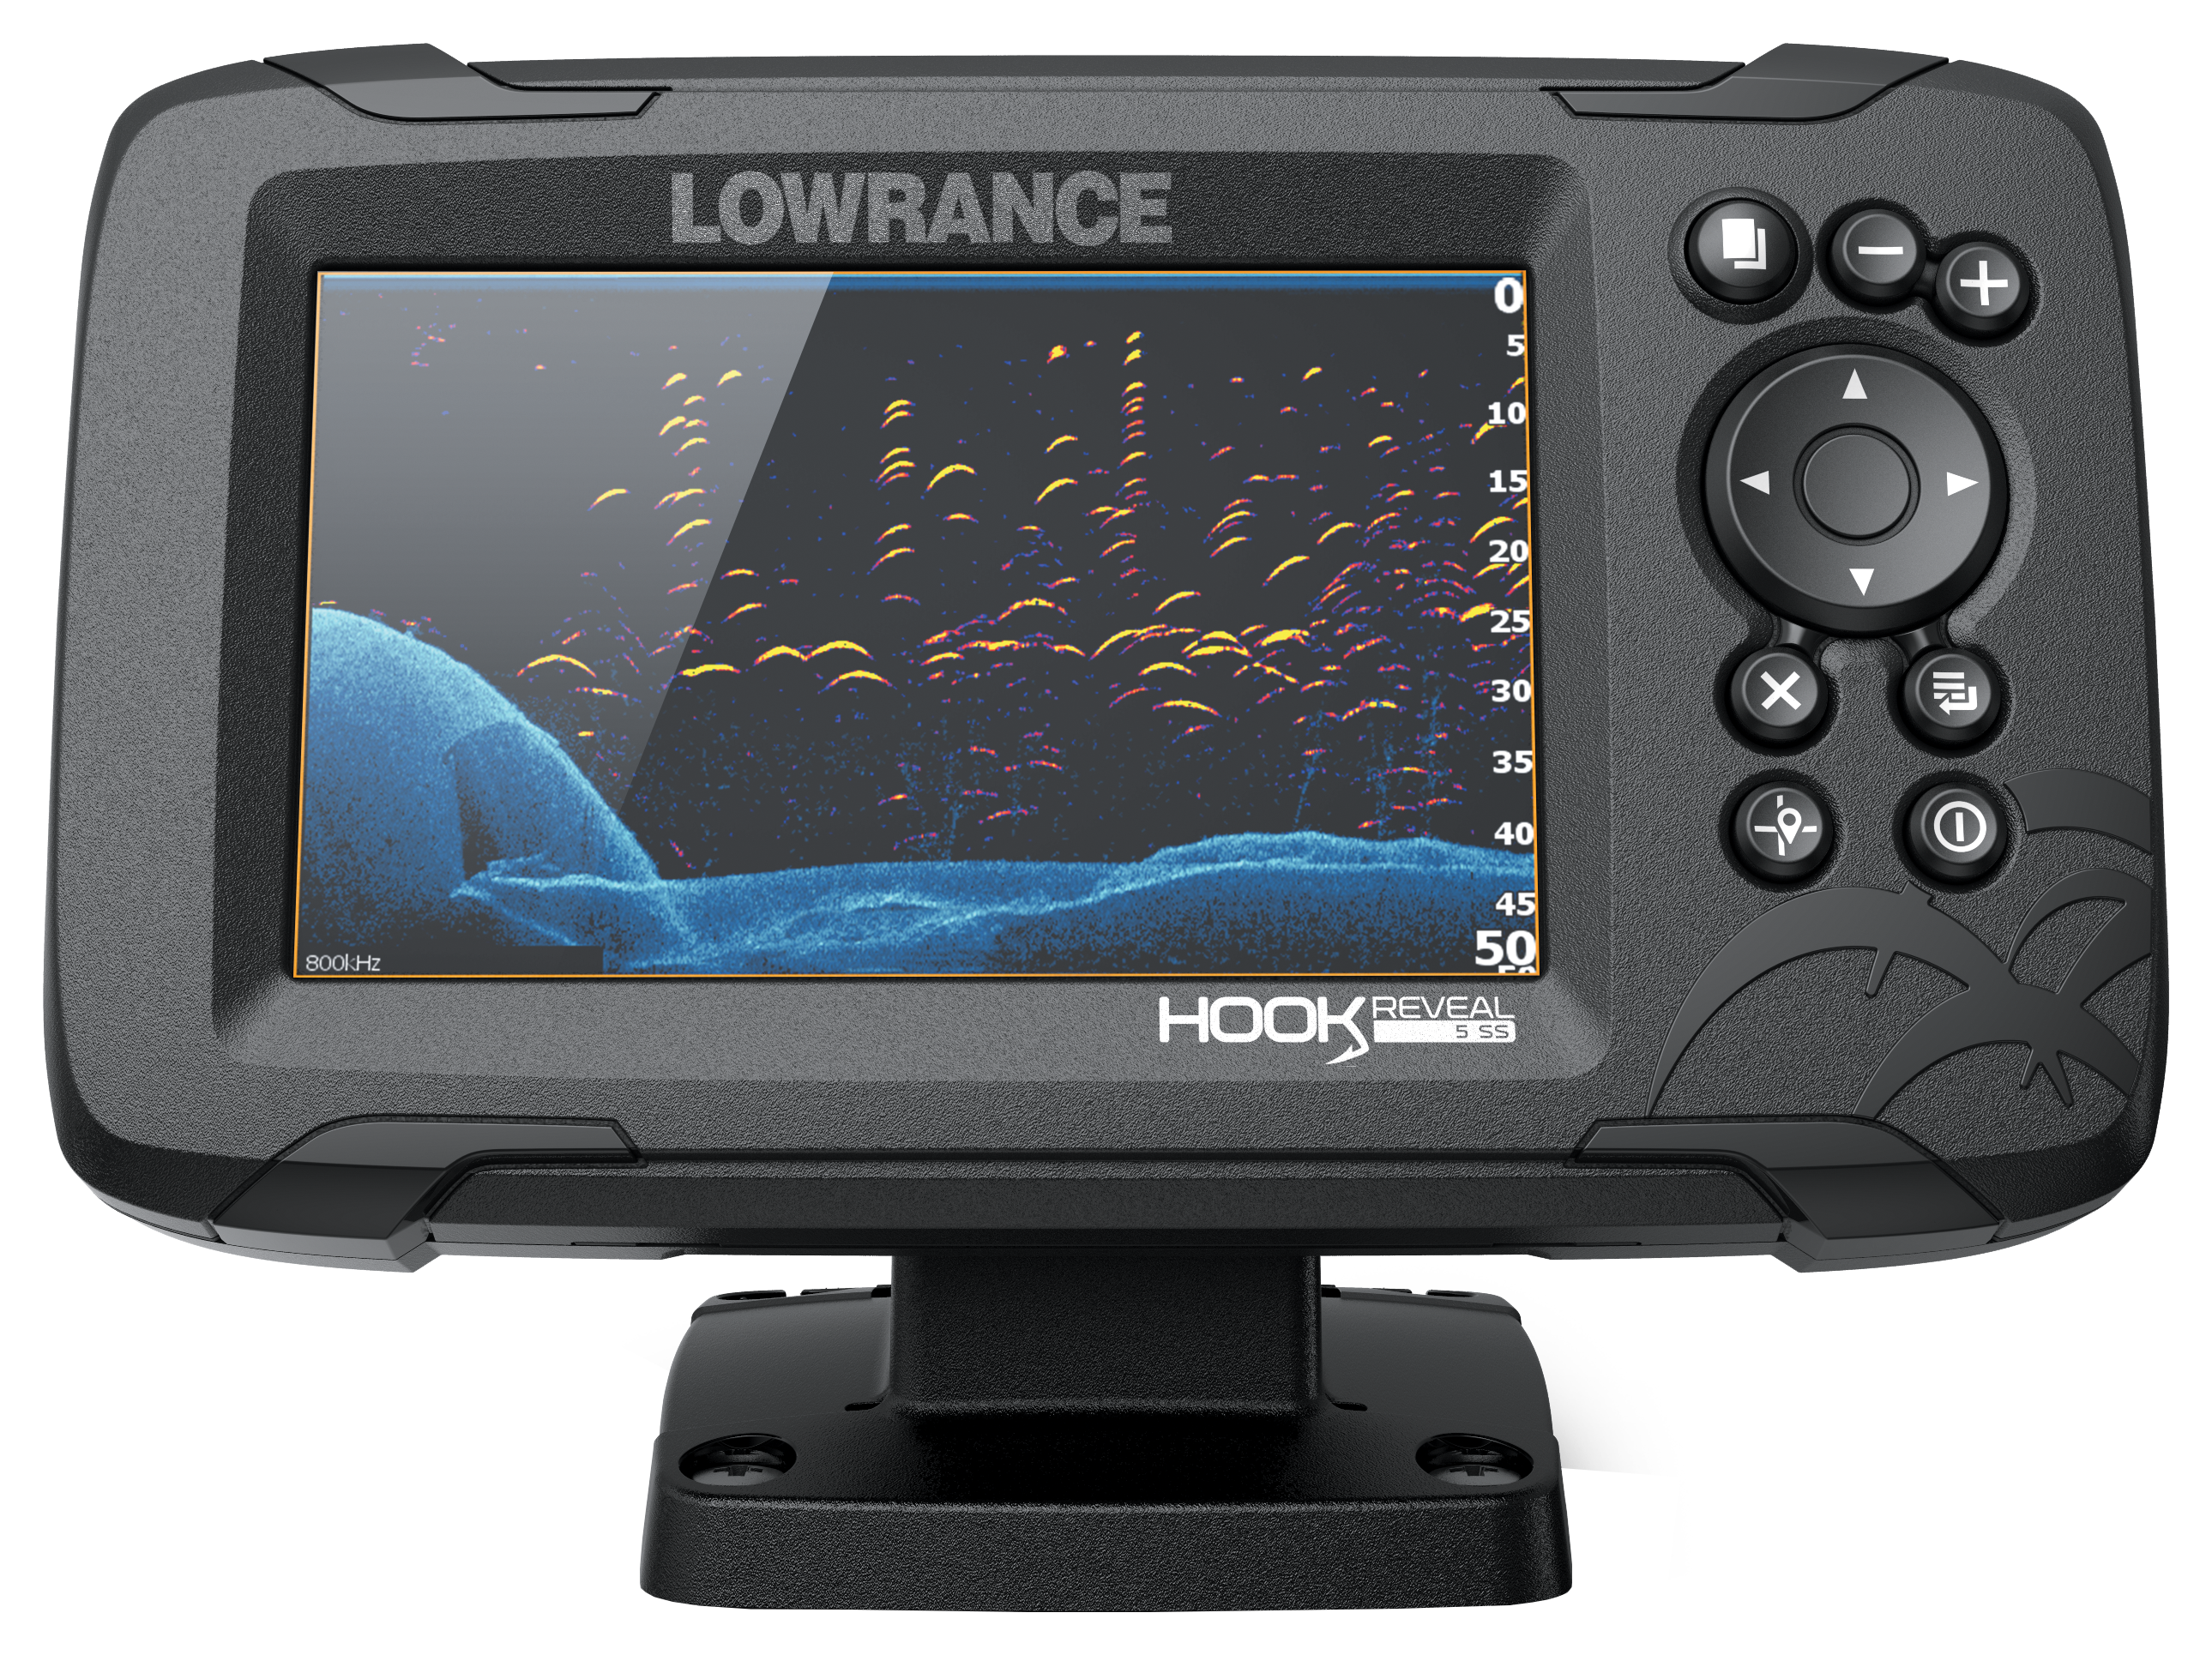 Lowrance HOOK Reveal 5 Fish Finder - 5 SS US Inland